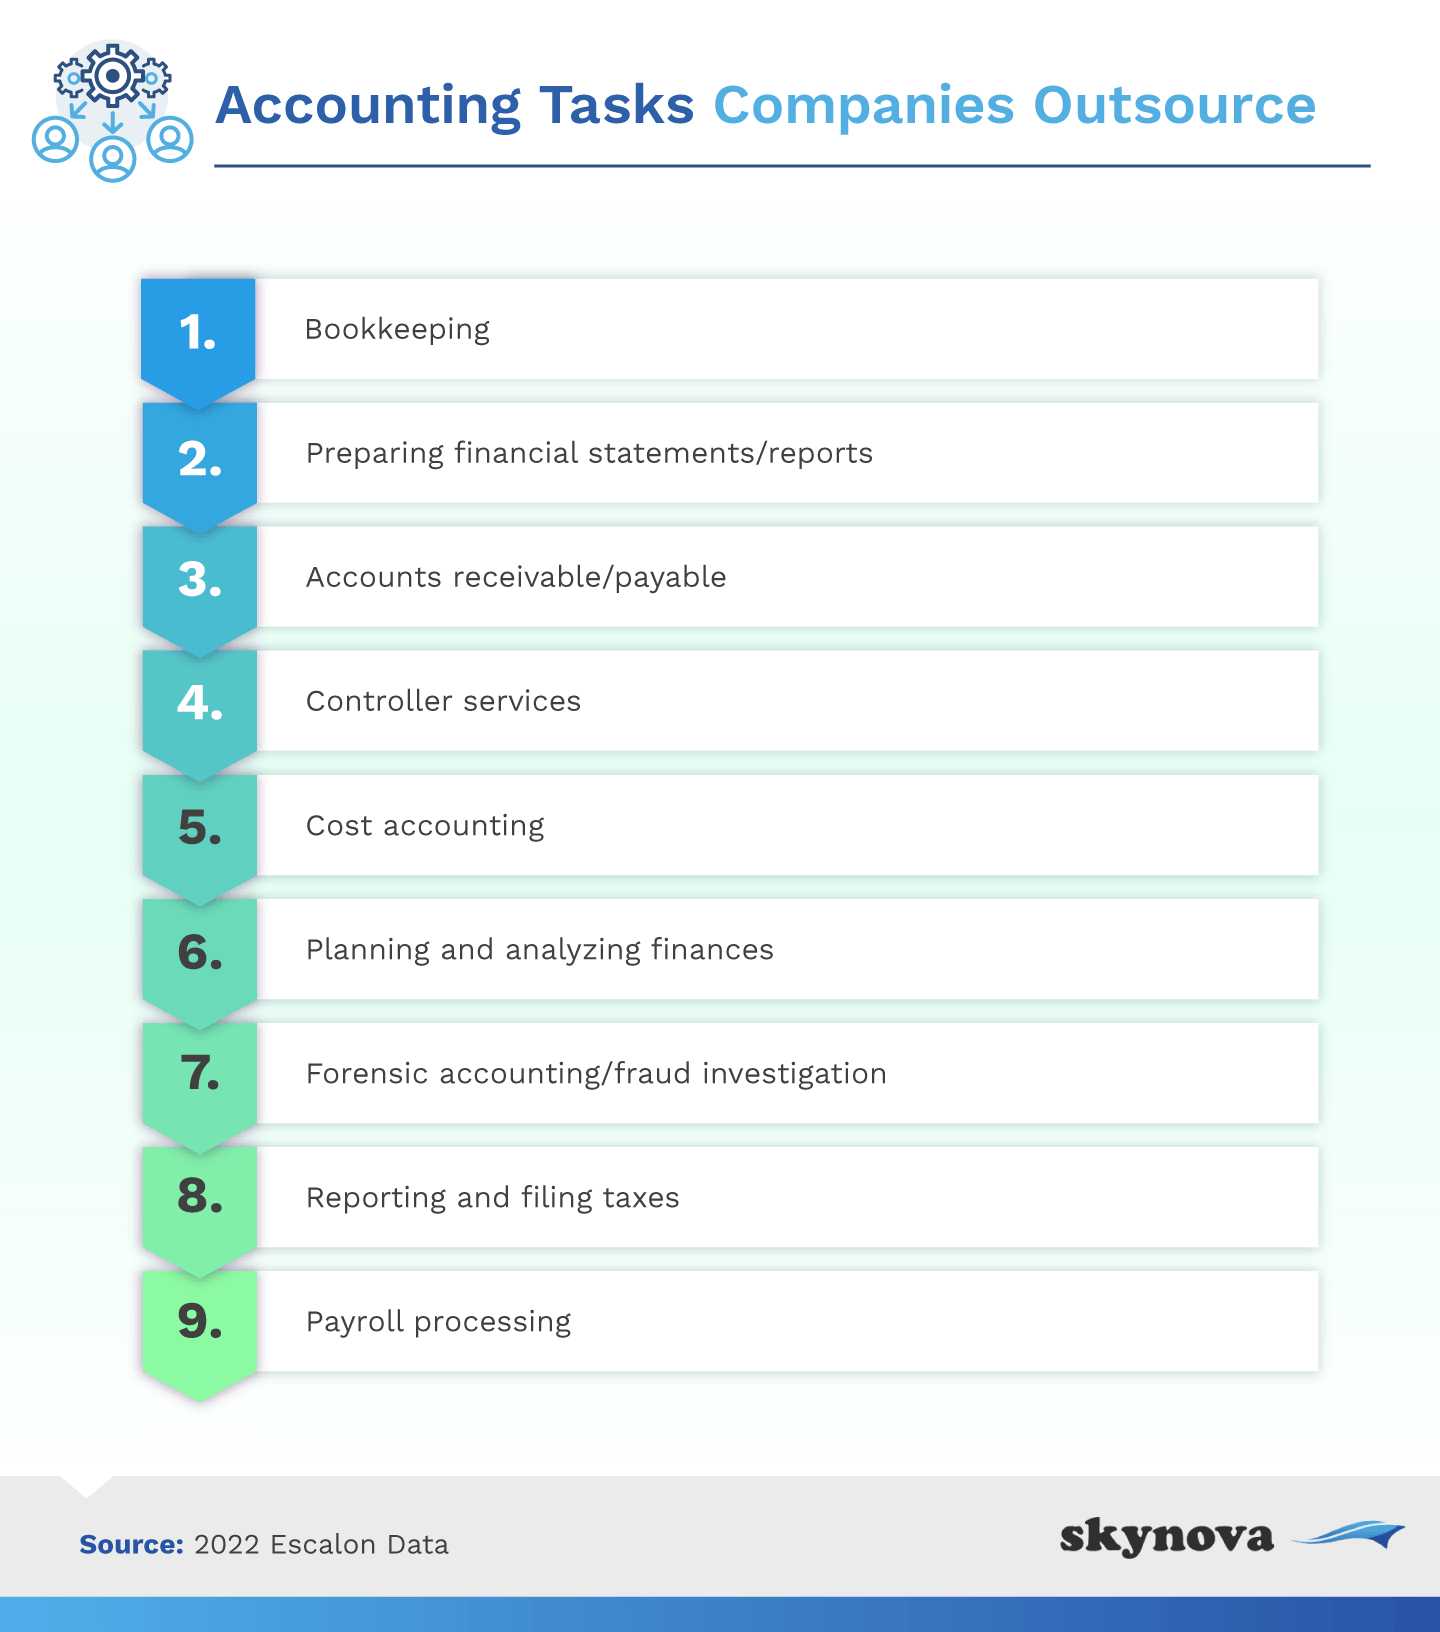 Accounting tasks that get outsourced